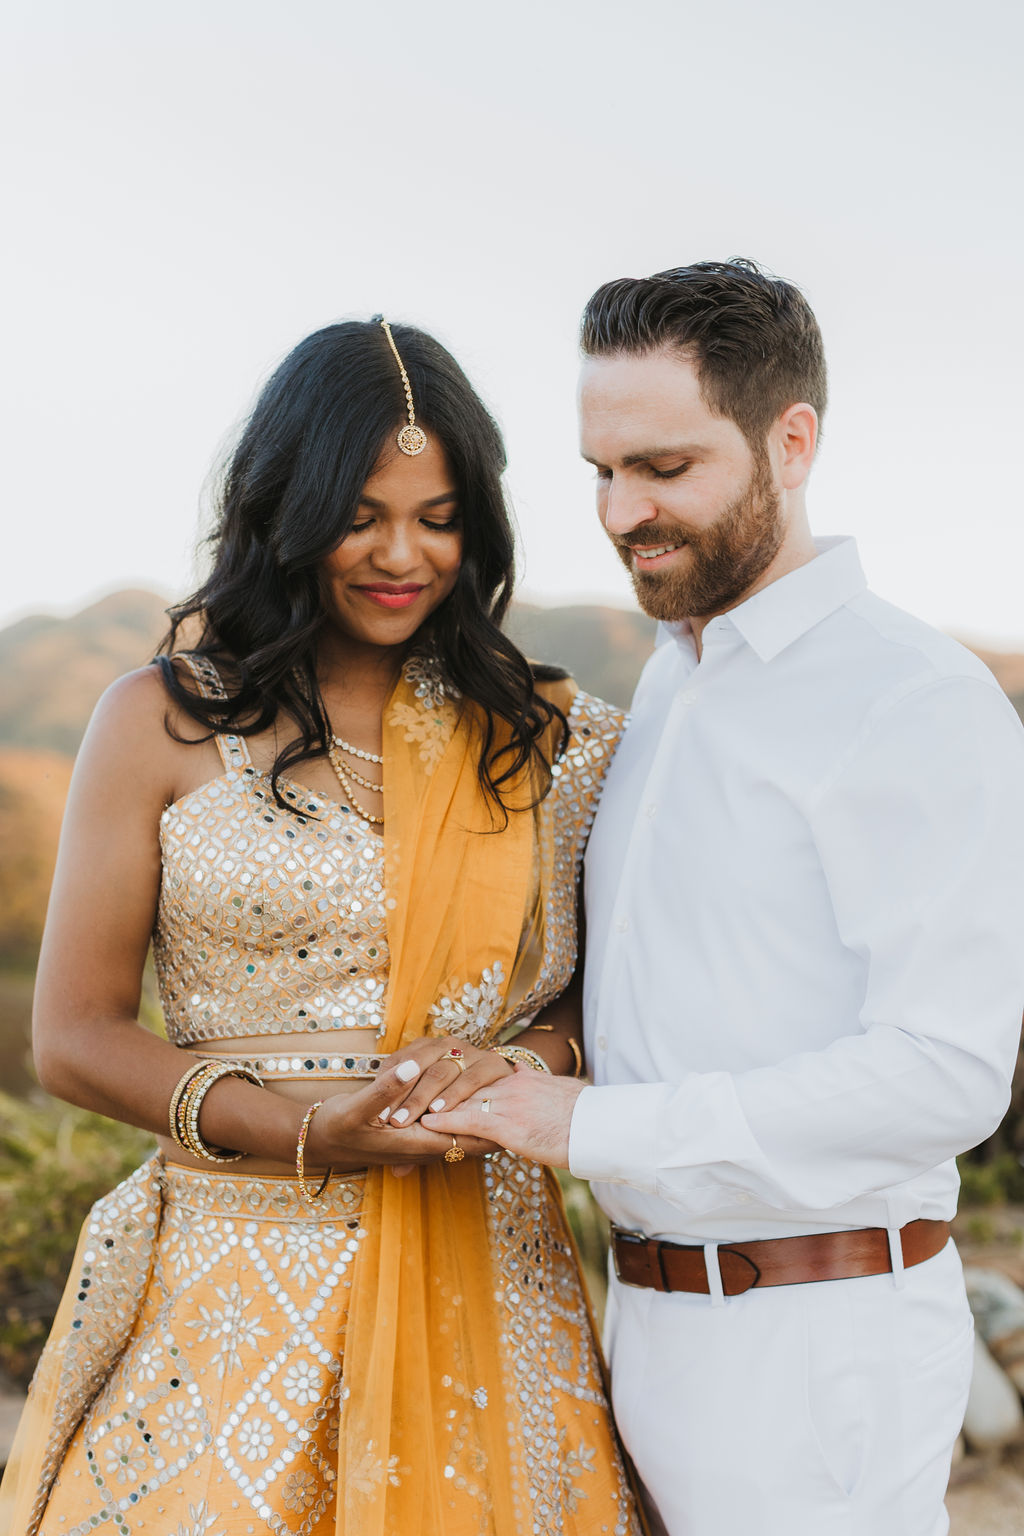 bride in orange sari stands with groom in white during sunset photos at Saddlerock Ranch in Malibu